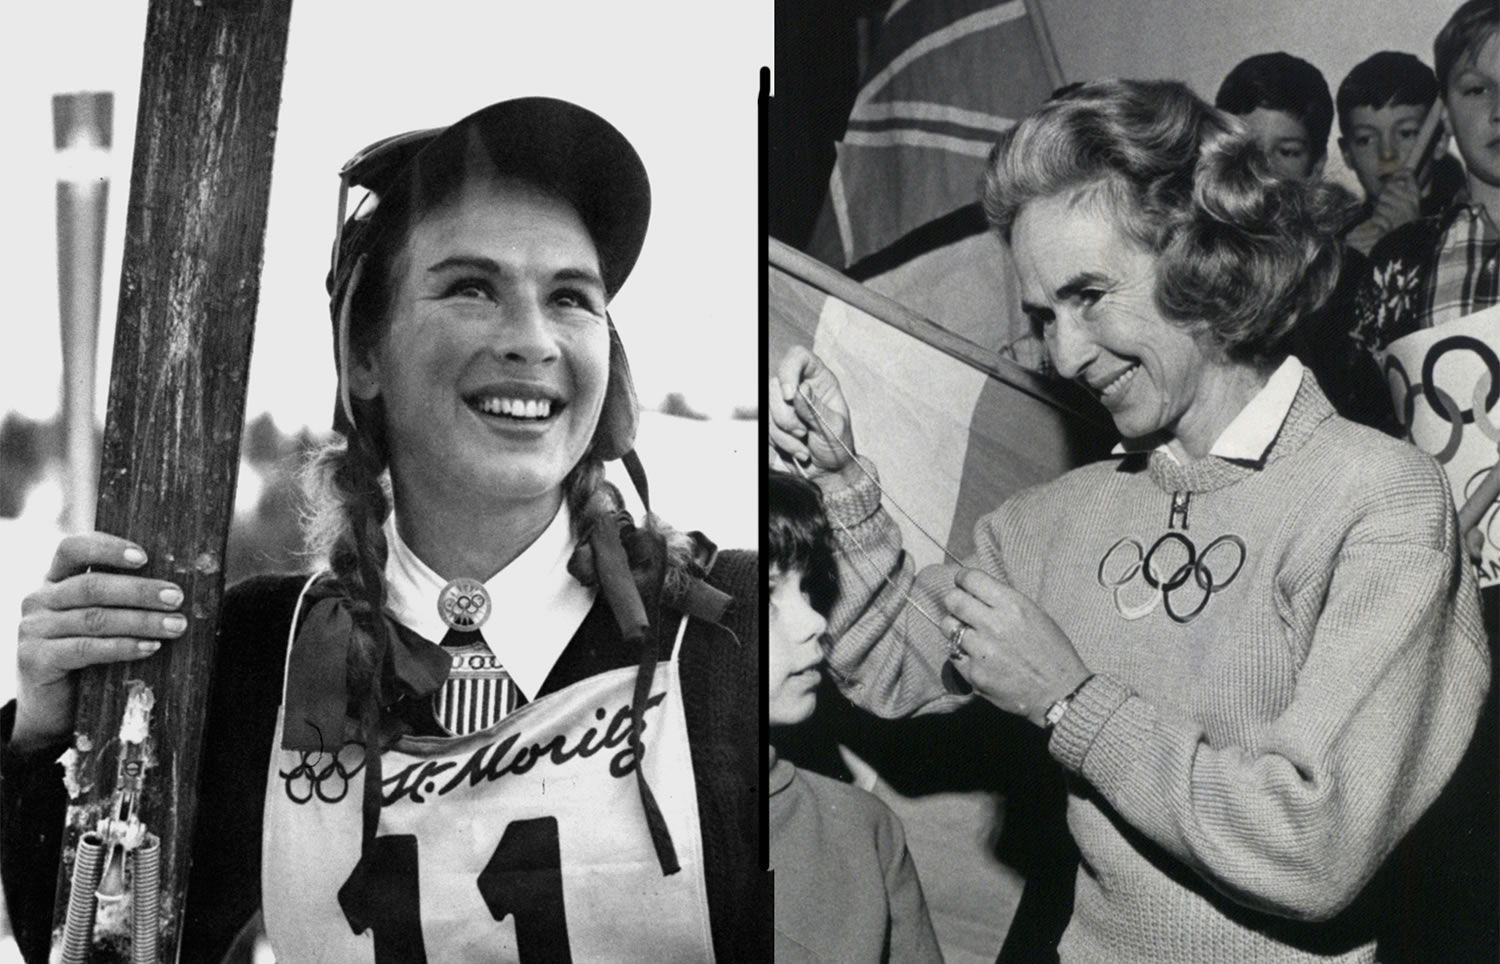 Right: &quot;Gretchen Fraser, a housewife of Vancouver, Wash., is all smiles after placing second in the Women's Alpine combined ski test, at St. Moritz, Switzerland,&quot; The Associated Press reported on Feb. 4, 1948. &quot;By placing second, Gretchen accomplished something no American ever had done before winning a medal in an Olympic skiing event,&quot; the photo caption continued.